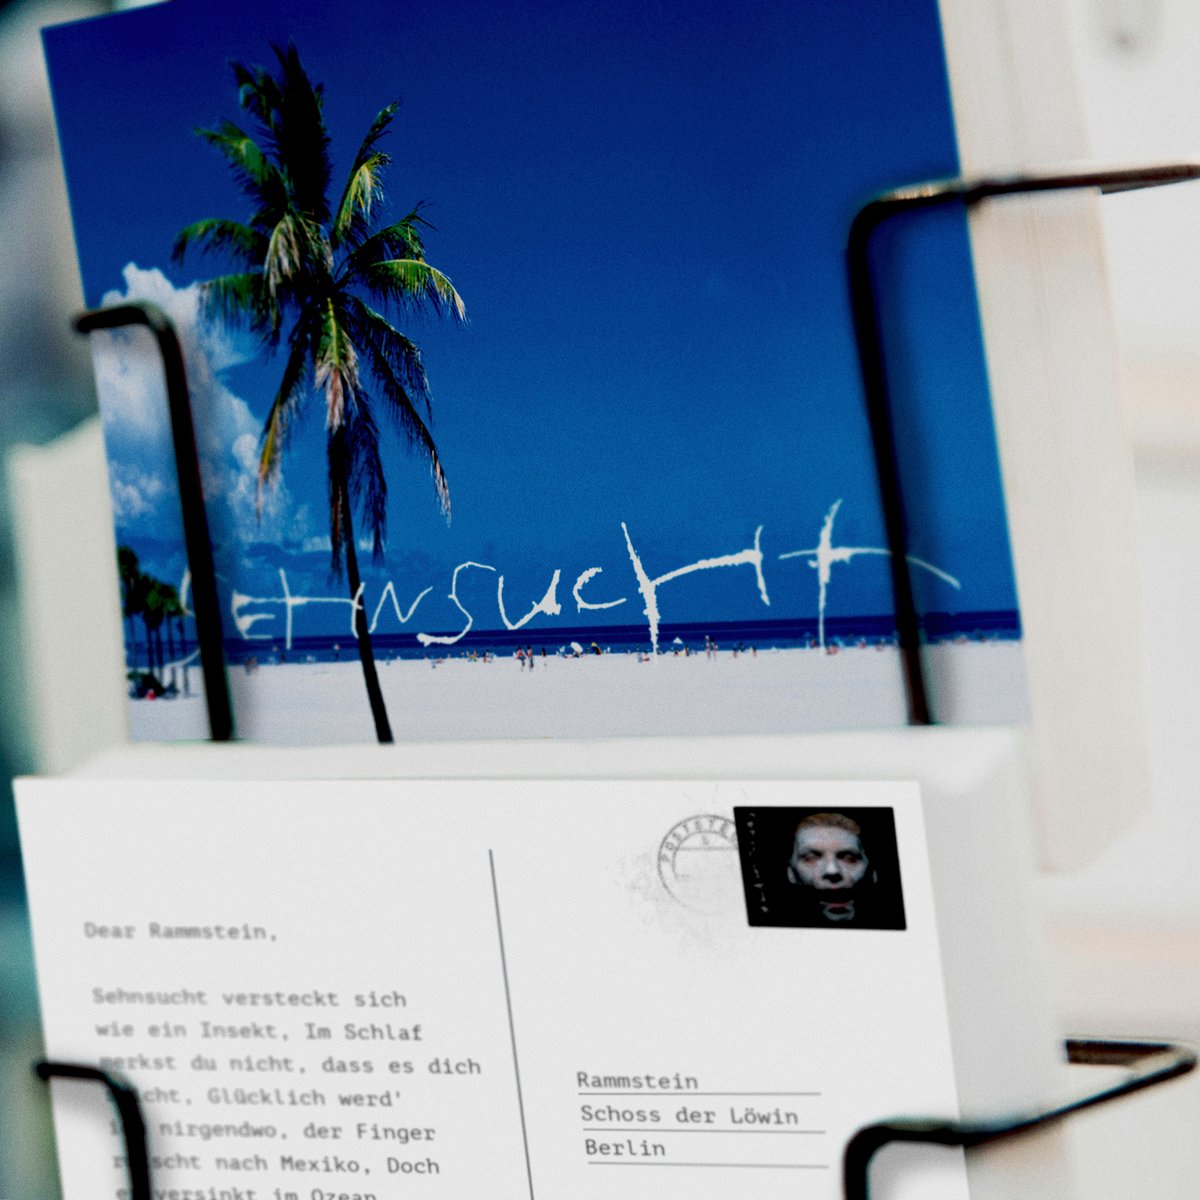 Du Hast Post! Send a Rammstein postcard with a Rammstein stamp wherever you want in the world with every pre-order of the 'Sehnsucht Anniversary Edition' in the RammsteinShop. Get yours at: sehnsucht.rammstein.com